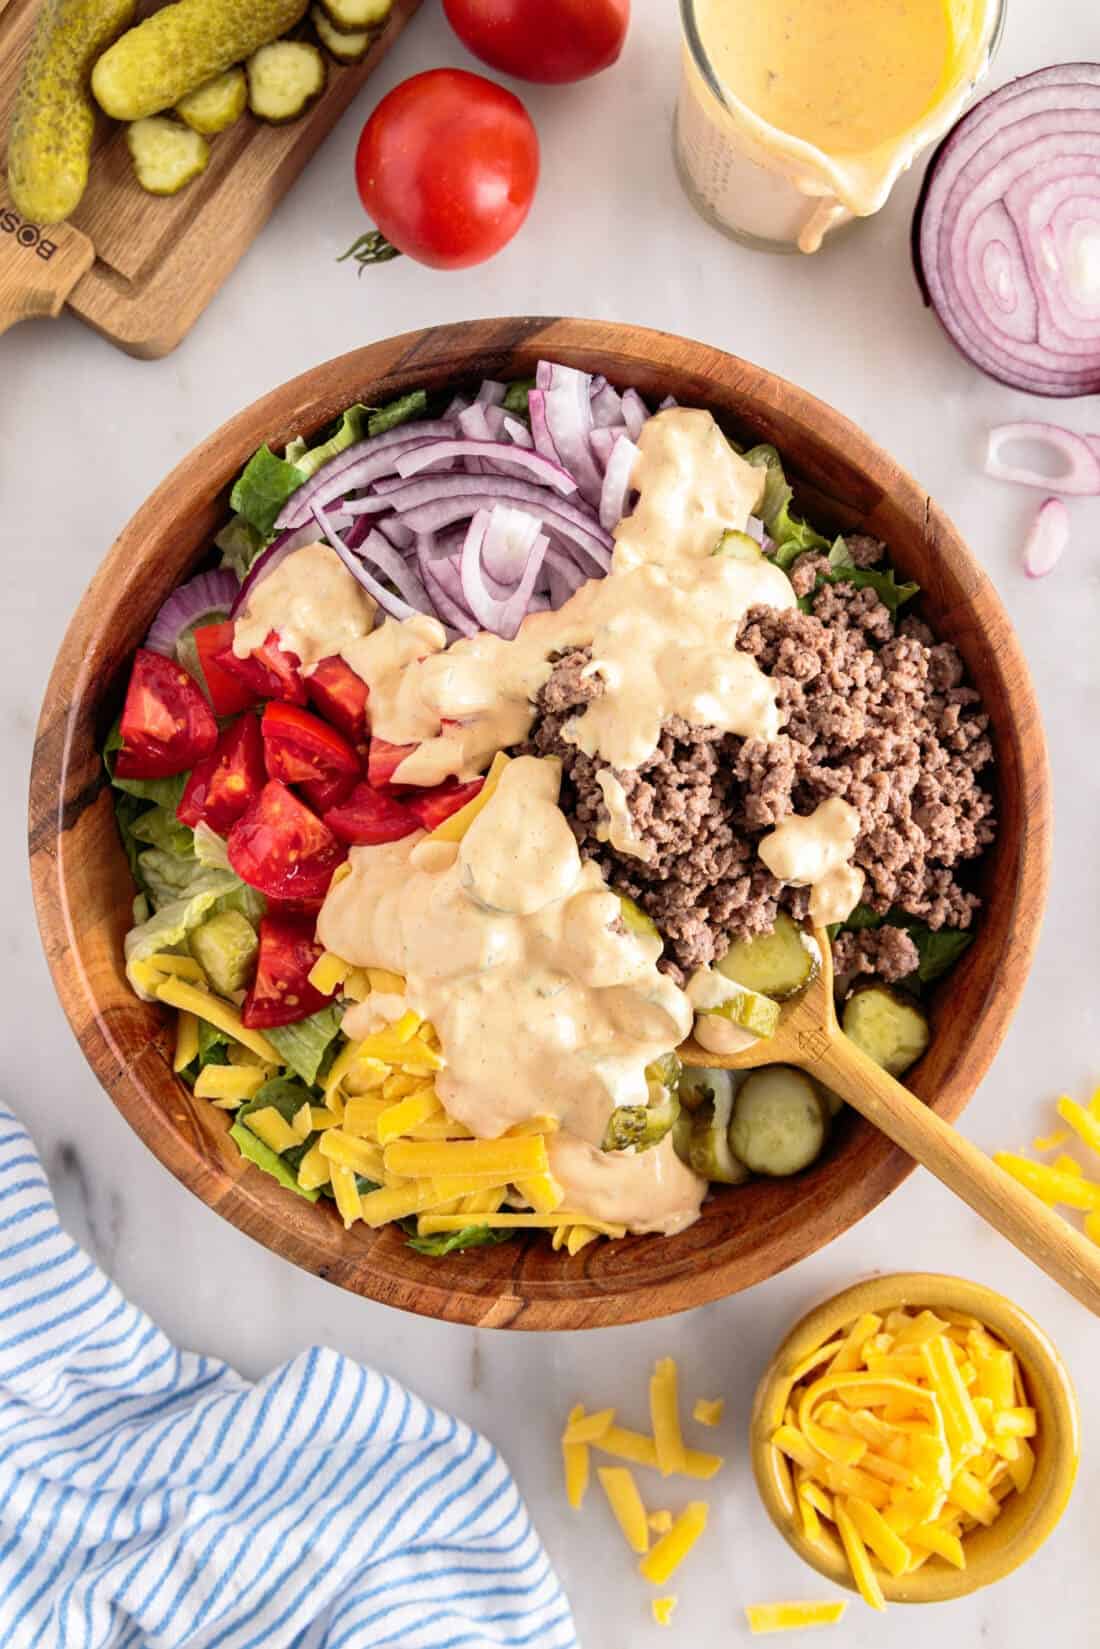 A Big Mac Salad in a wooden bowl on a table with ingredients on it.